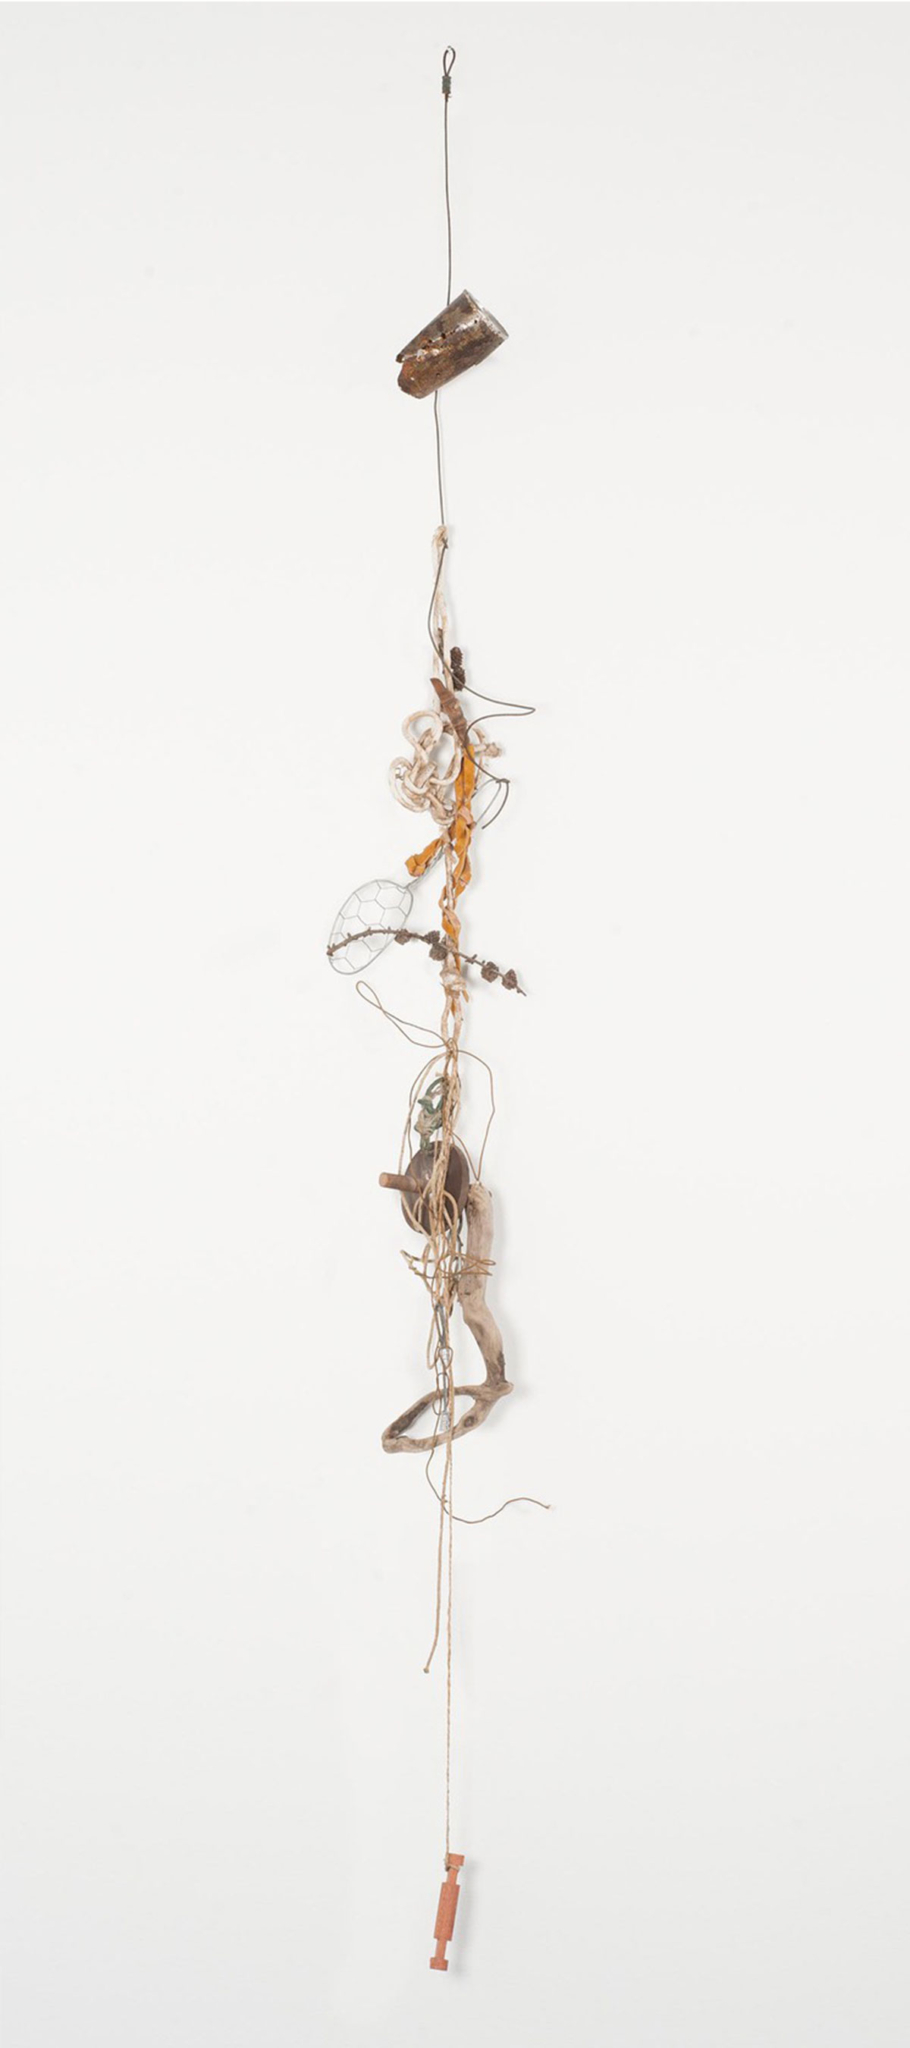 A delicate sculpture reminiscent of a wind chime, made with one long thread wrapped around small twisted objects